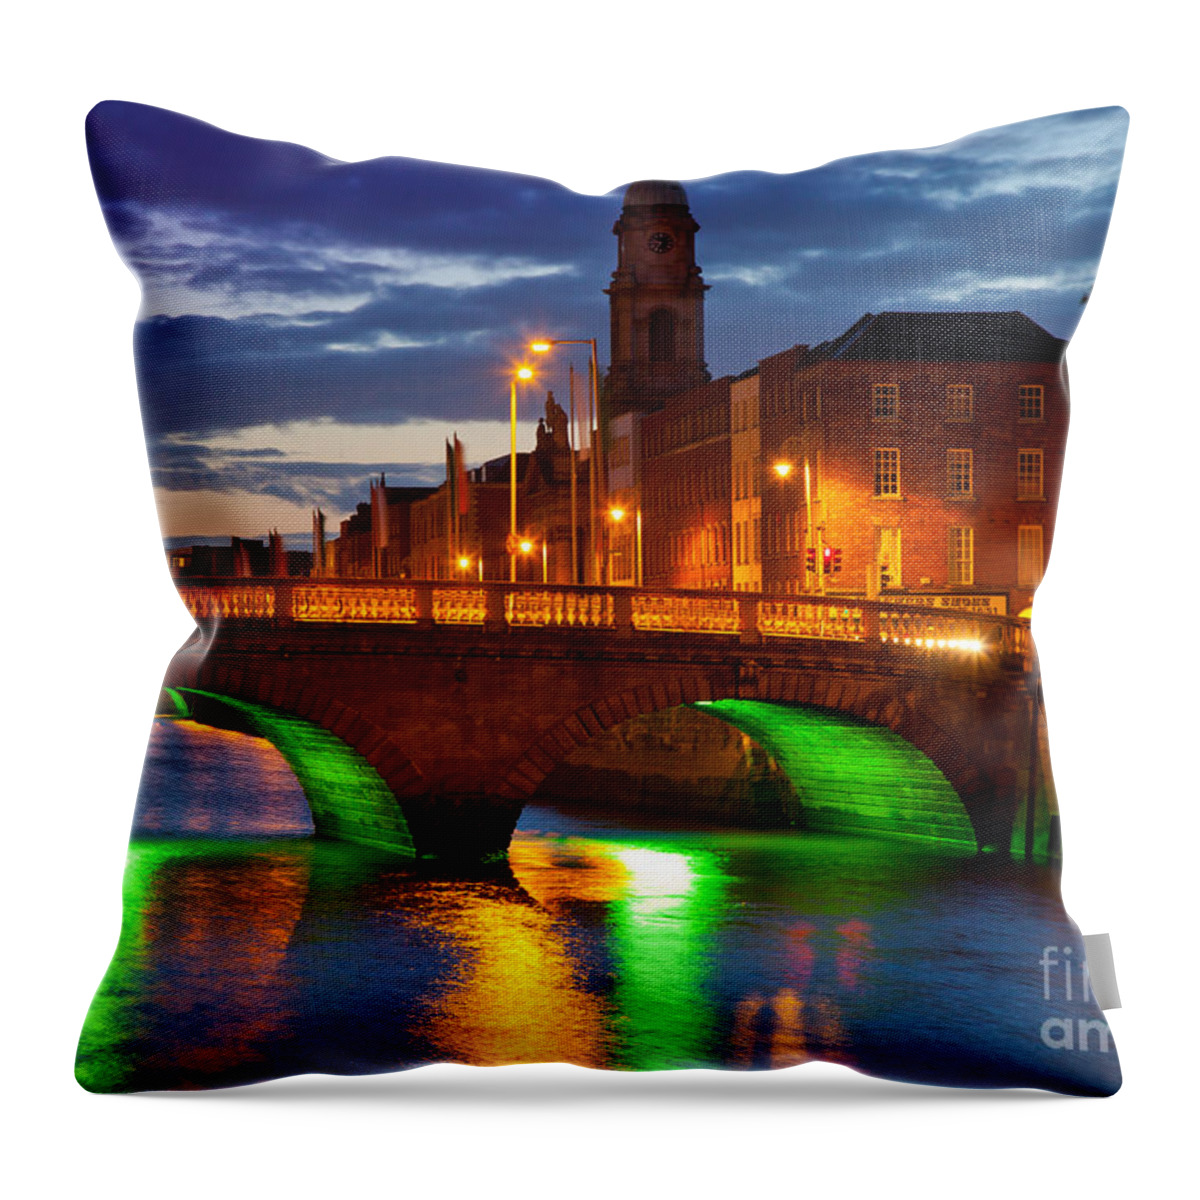 Dublin Throw Pillow featuring the photograph Father Matthew Bridge by Inge Johnsson